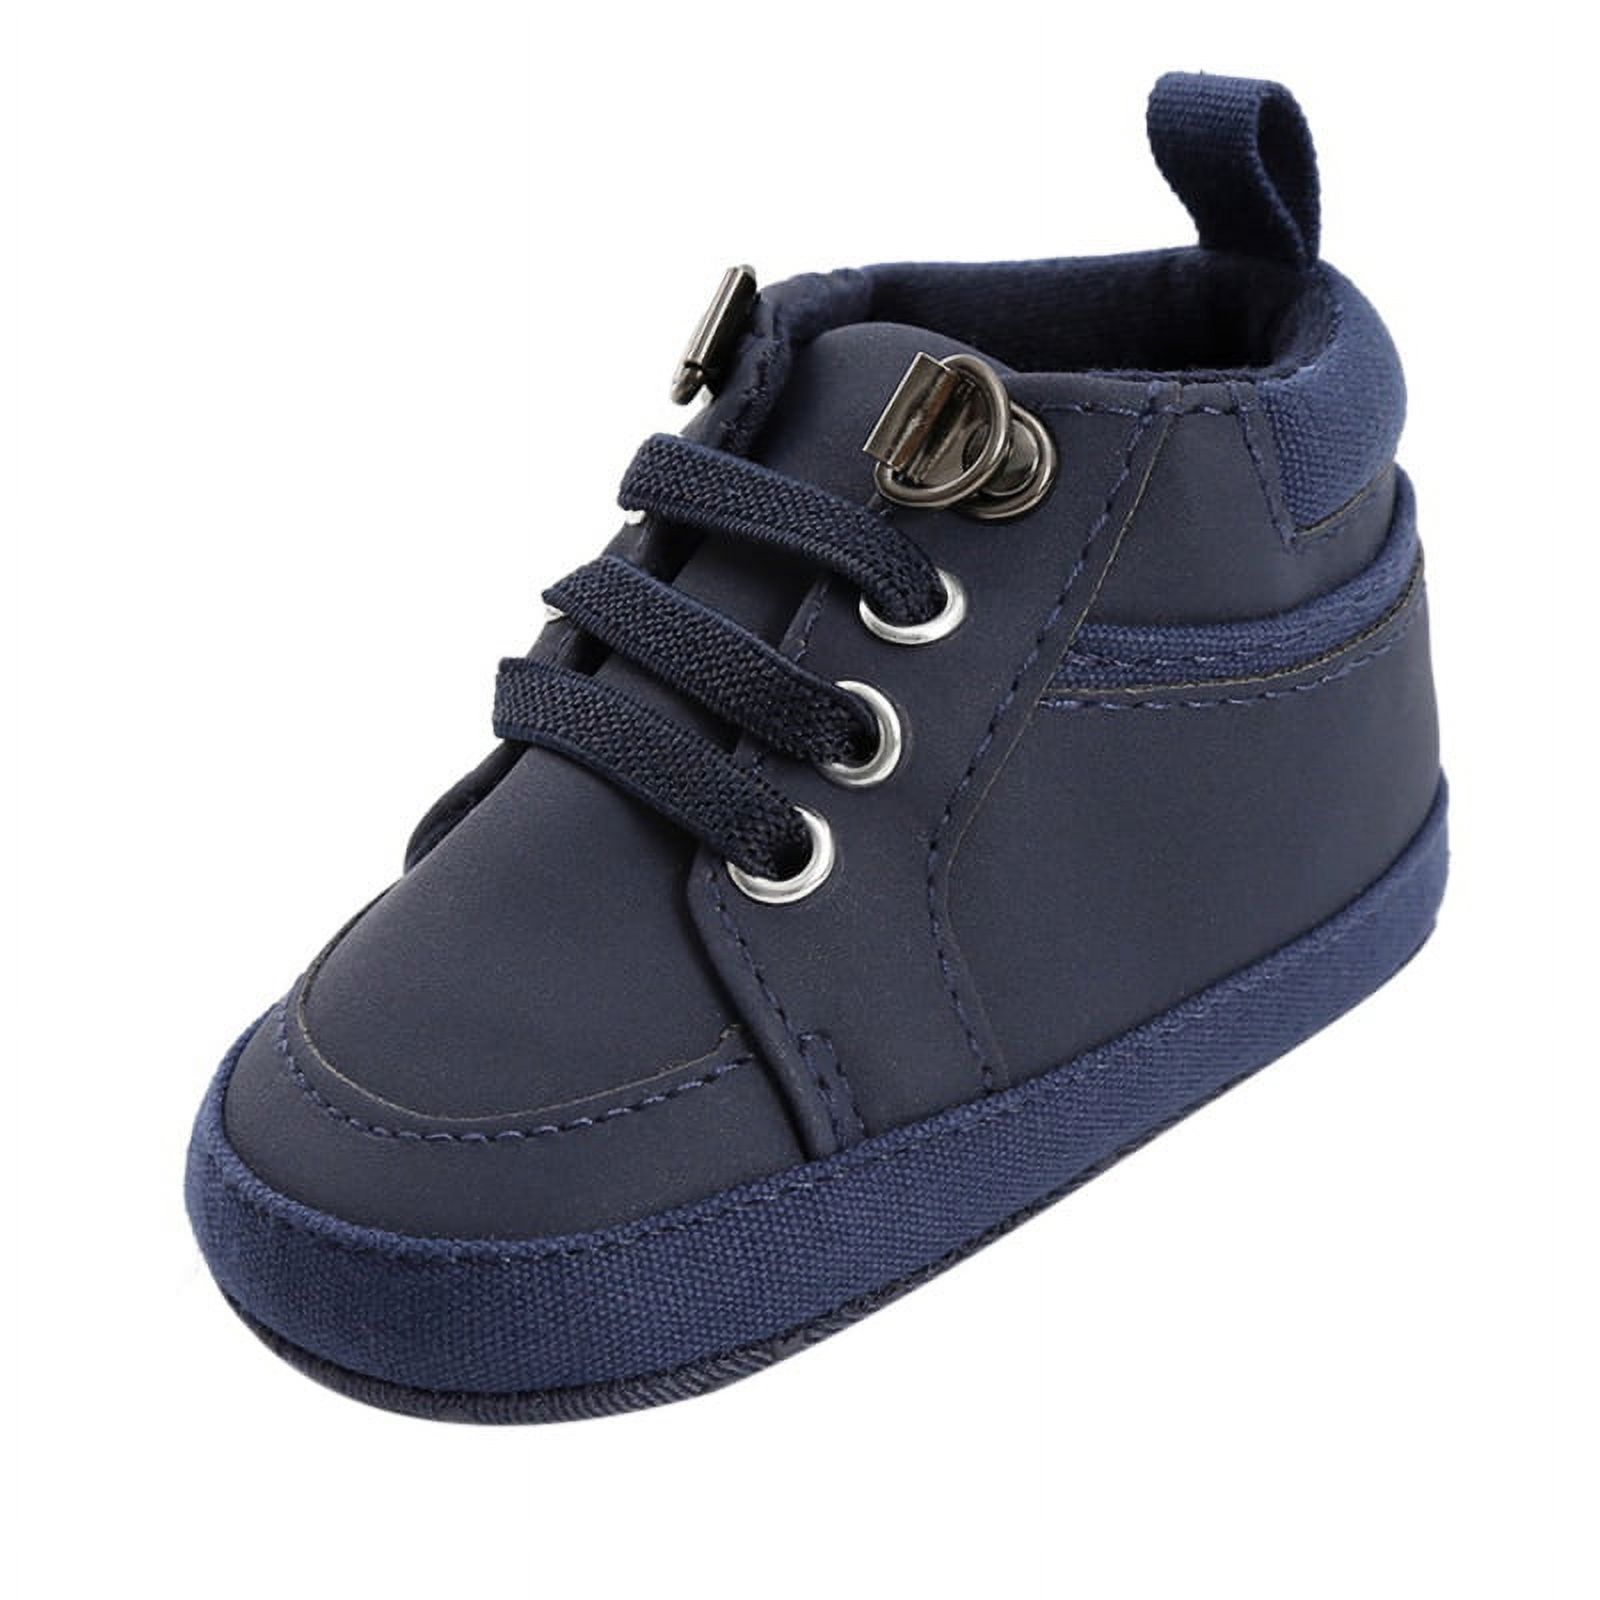 Baby Girls Boys Walking Shoes Toddler Infant First Walker Soft Sole High-Top Ankle Sneakers Newborn Crib Shoe - image 1 of 8